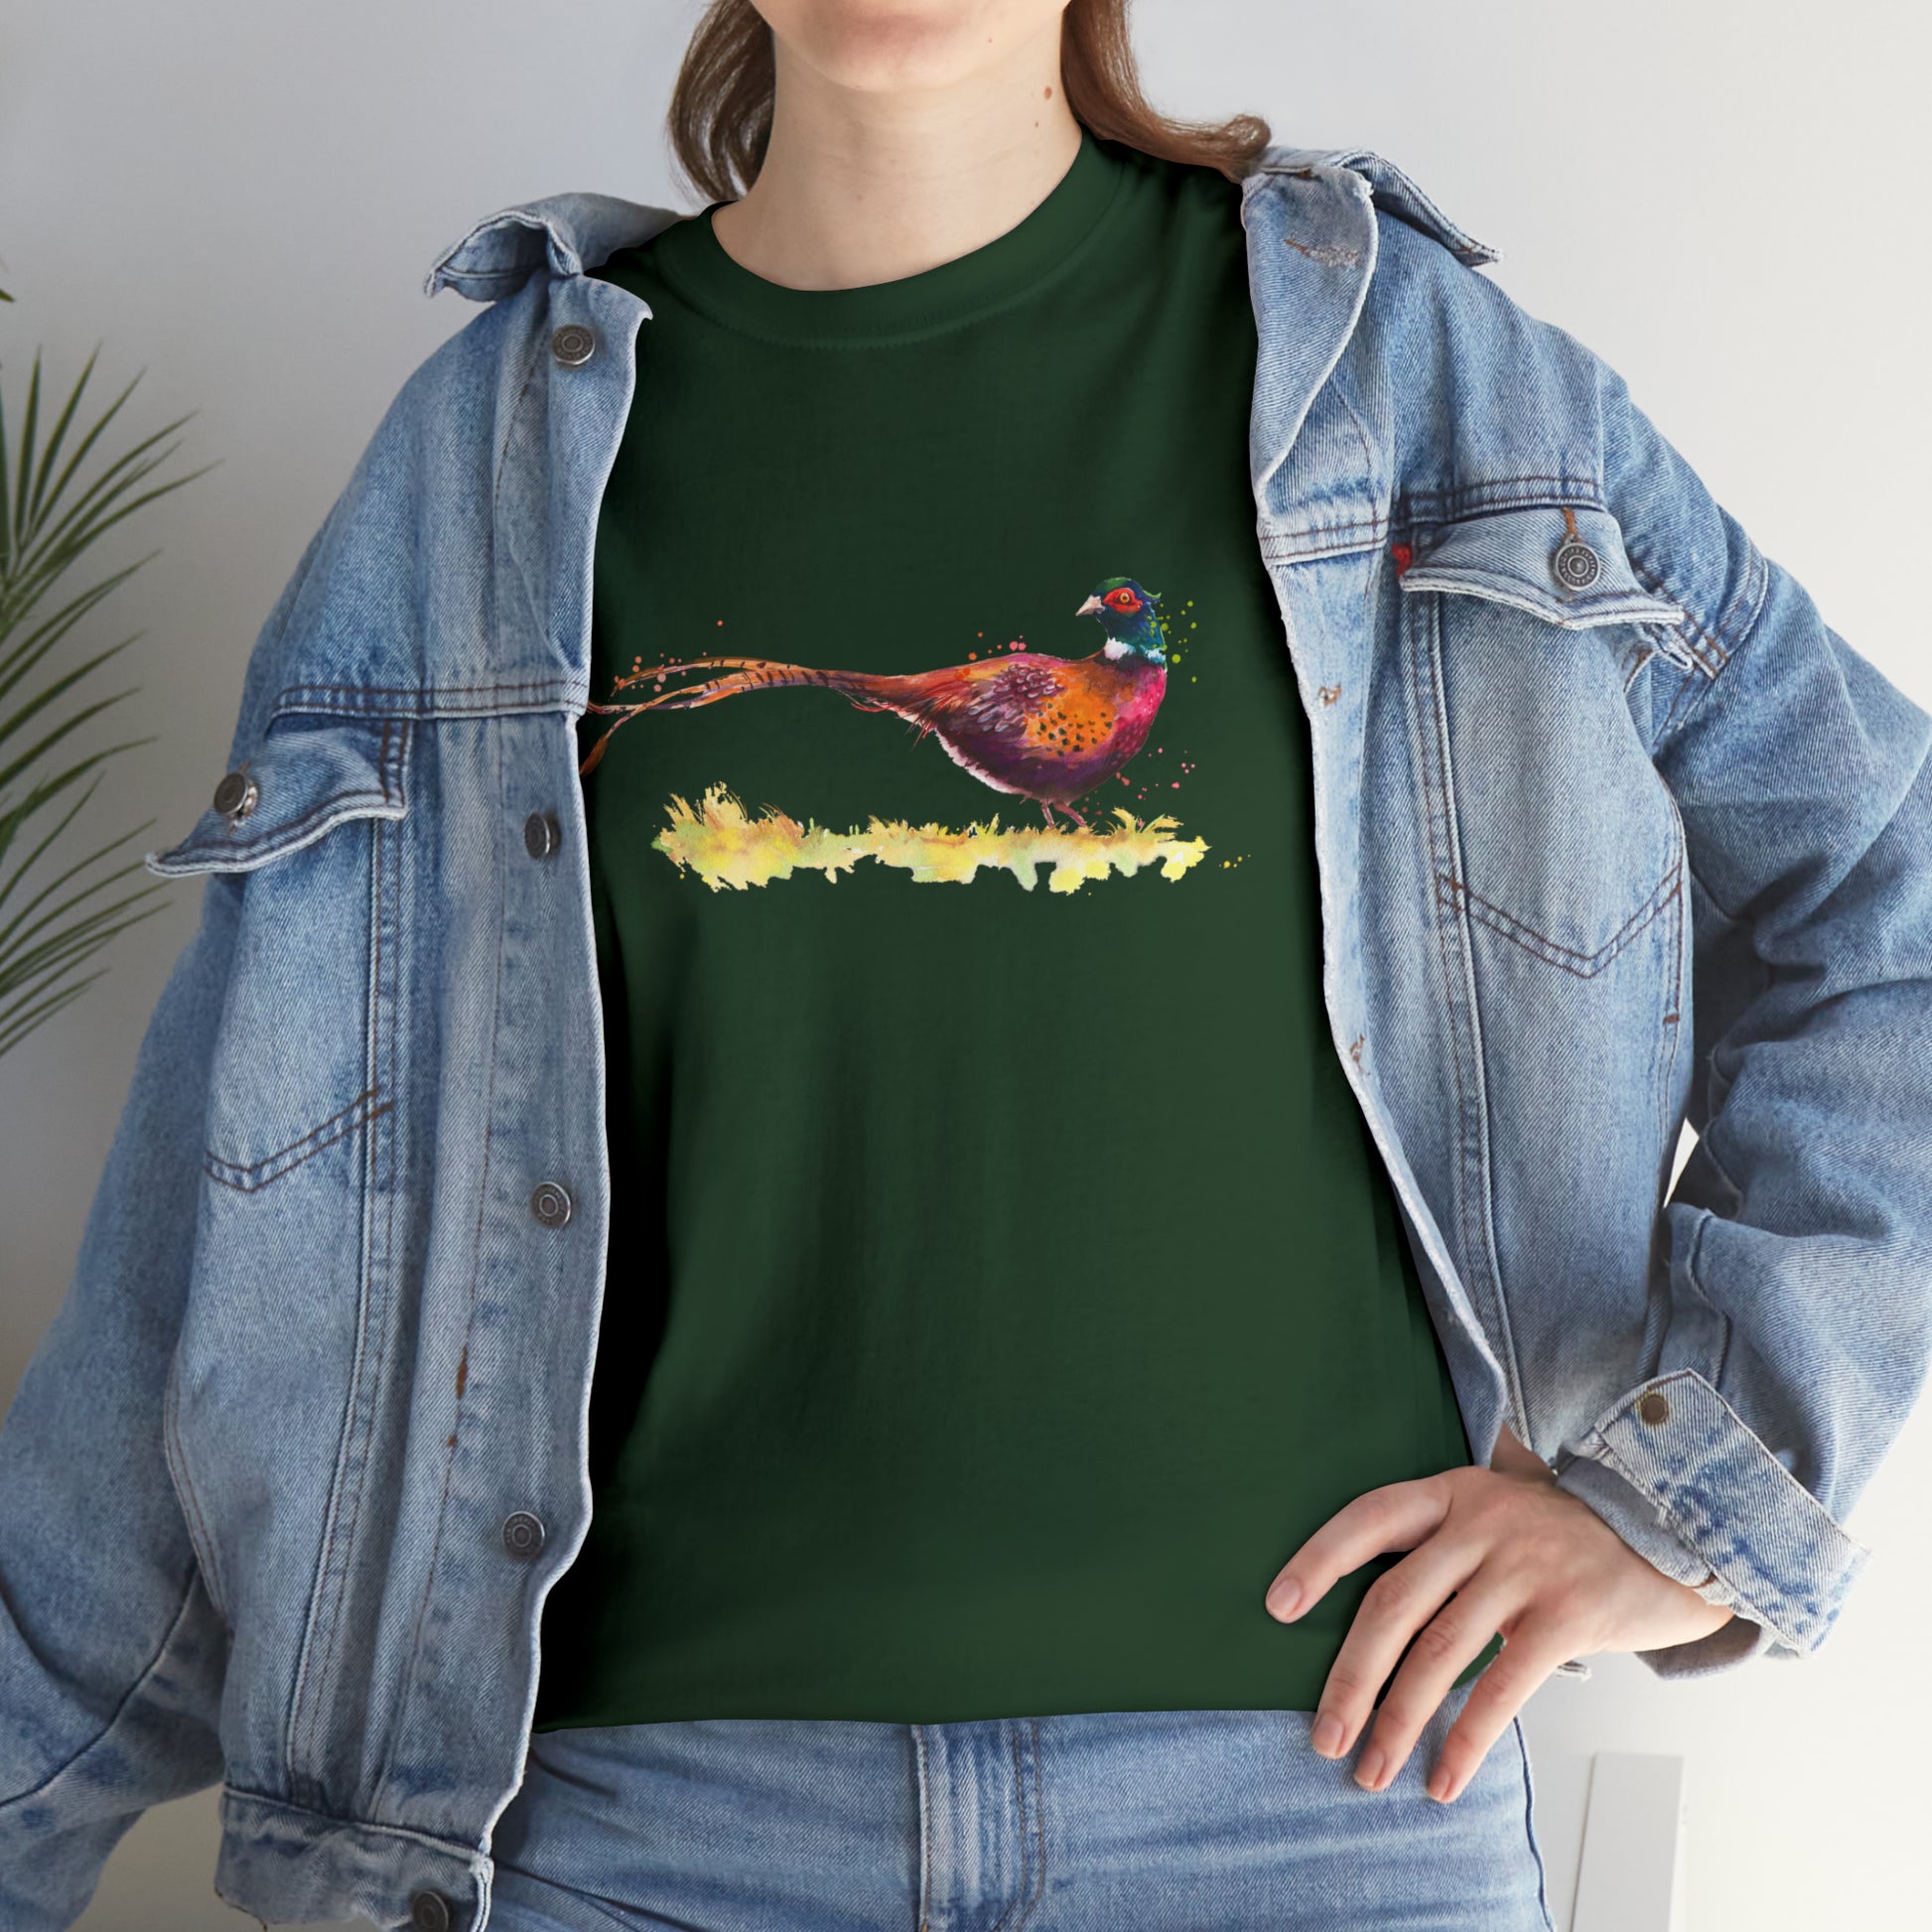 Mock up of a woman wearing the Forest Green shirt under a denim jacket